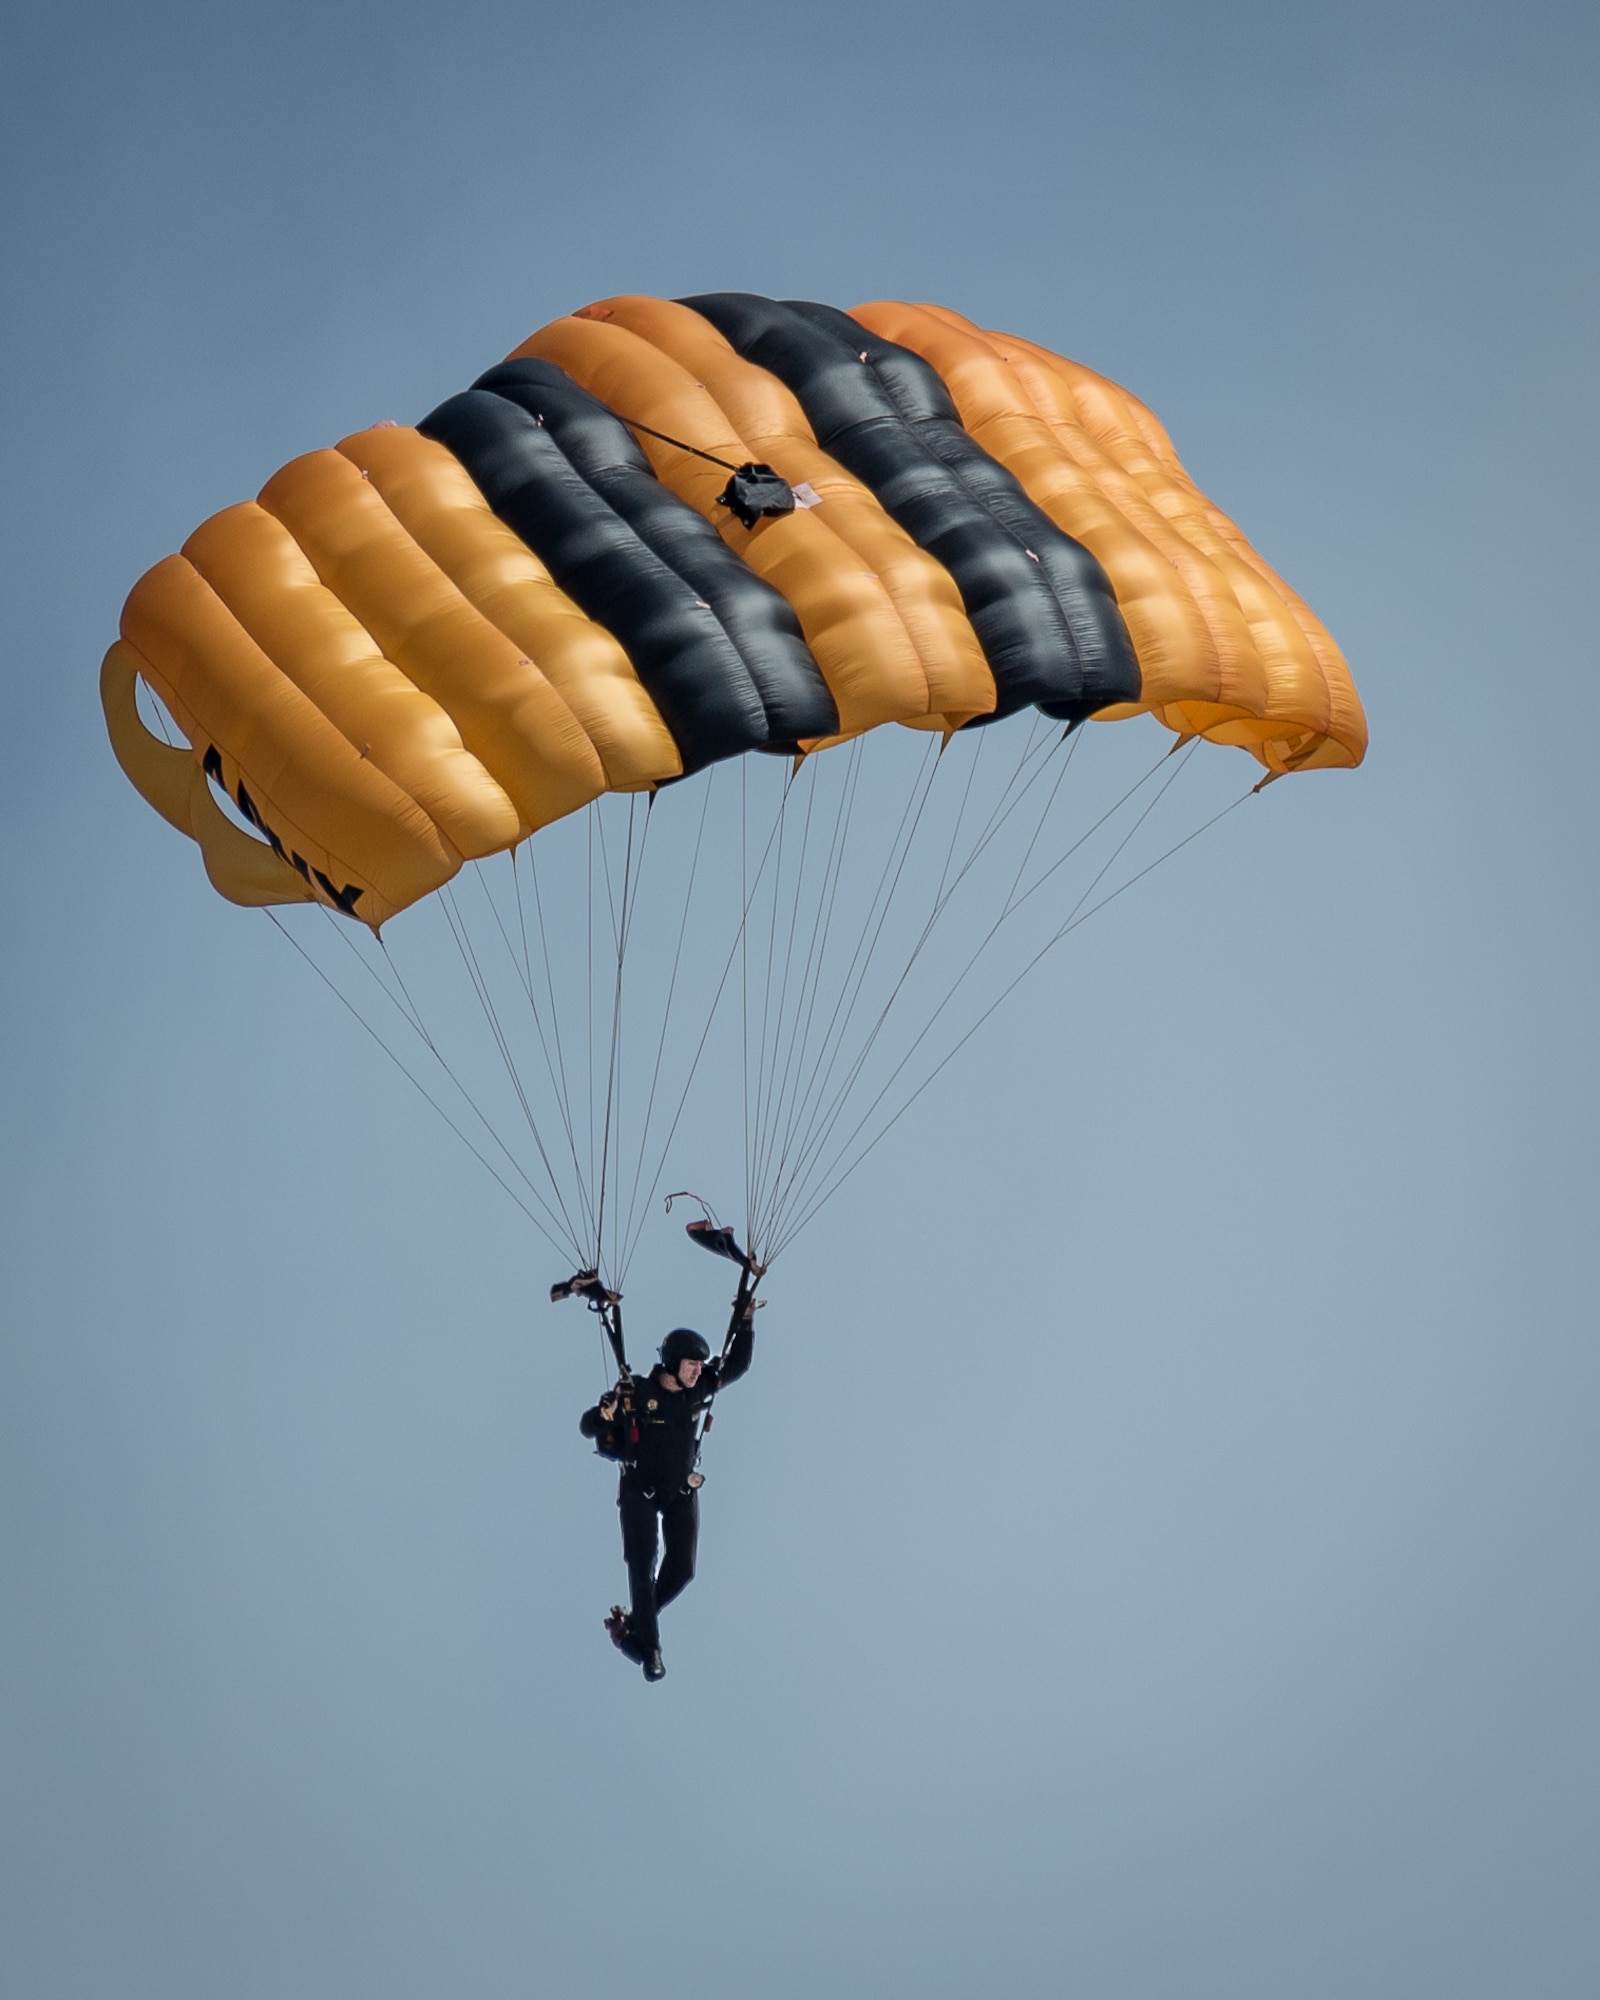 A soldier from the U.S. Army’s Golden Knights parachute demonstration team descends into downtown Louisville April 13, 2019, during the annual Thunder Over Louisville air show. Hundreds of thousands of spectators turned out to view the event, which has grown to become one of the largest single-day air shows in North America. (U.S. Air National Guard photo by Dale Greer)